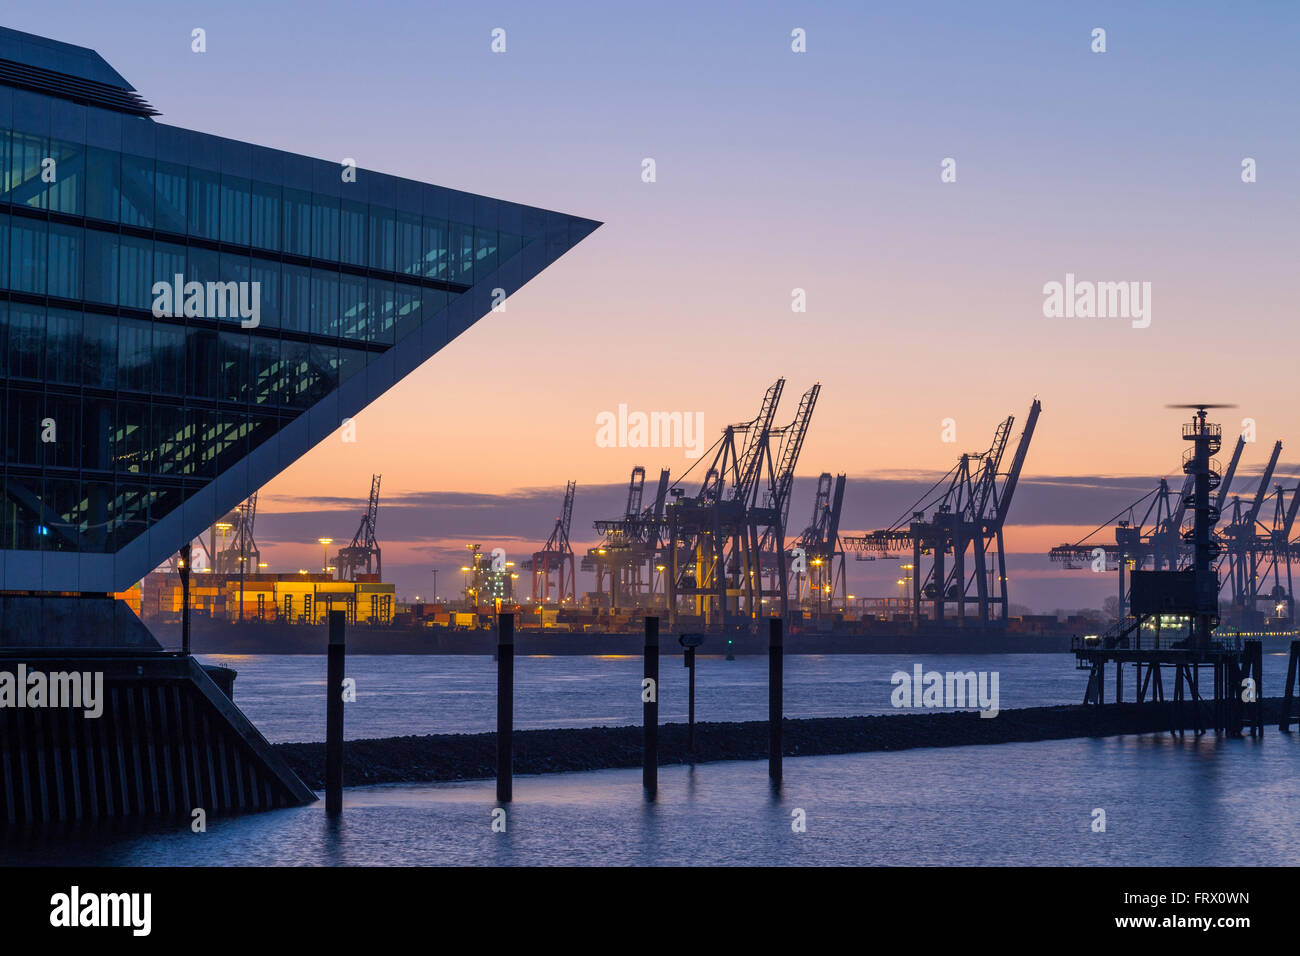 A landmark Dockland Office building in the modern part of the Hamburg Port Stock Photo